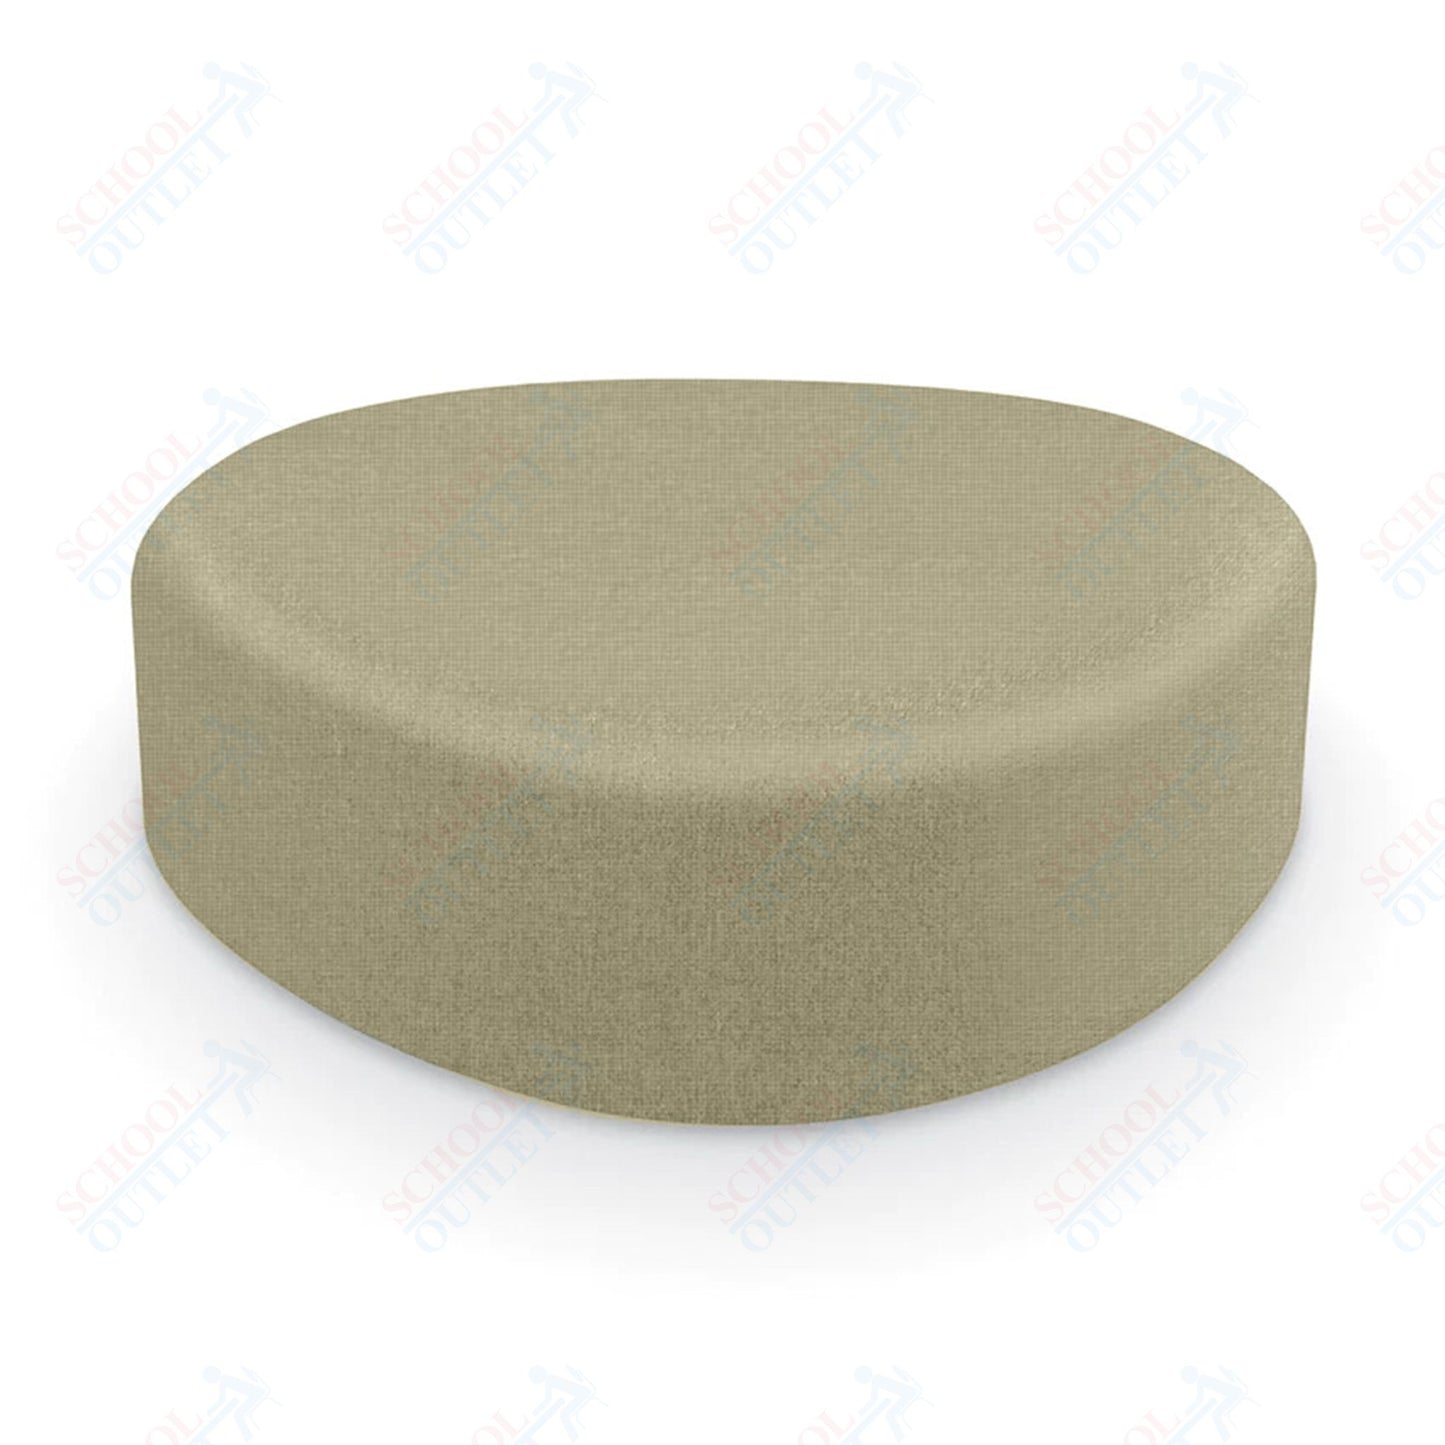 Mooreco Akt Soft Seating Lounge Large Ottoman - Grade 02 Fabric and Powder Coated Sled Legs